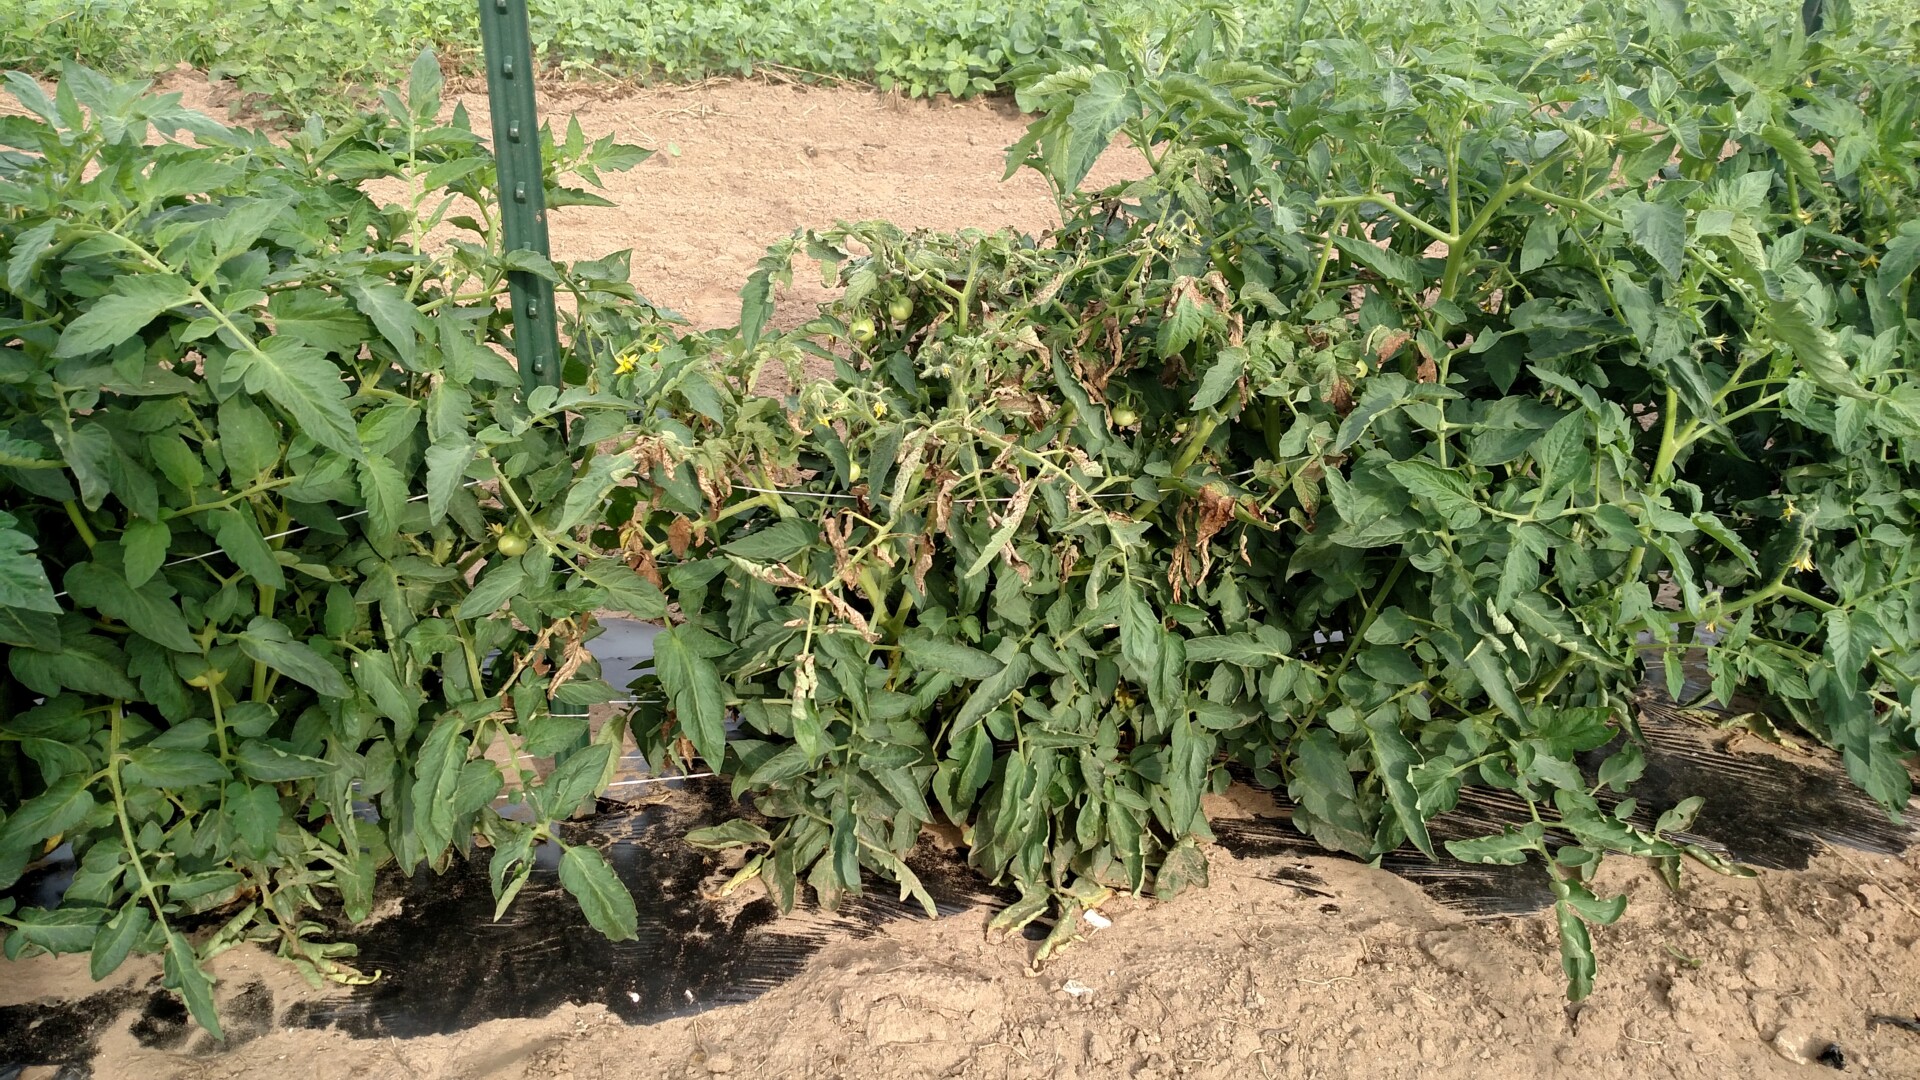 Center plant is stunted and wilted due to tomato spotted wilt virus.